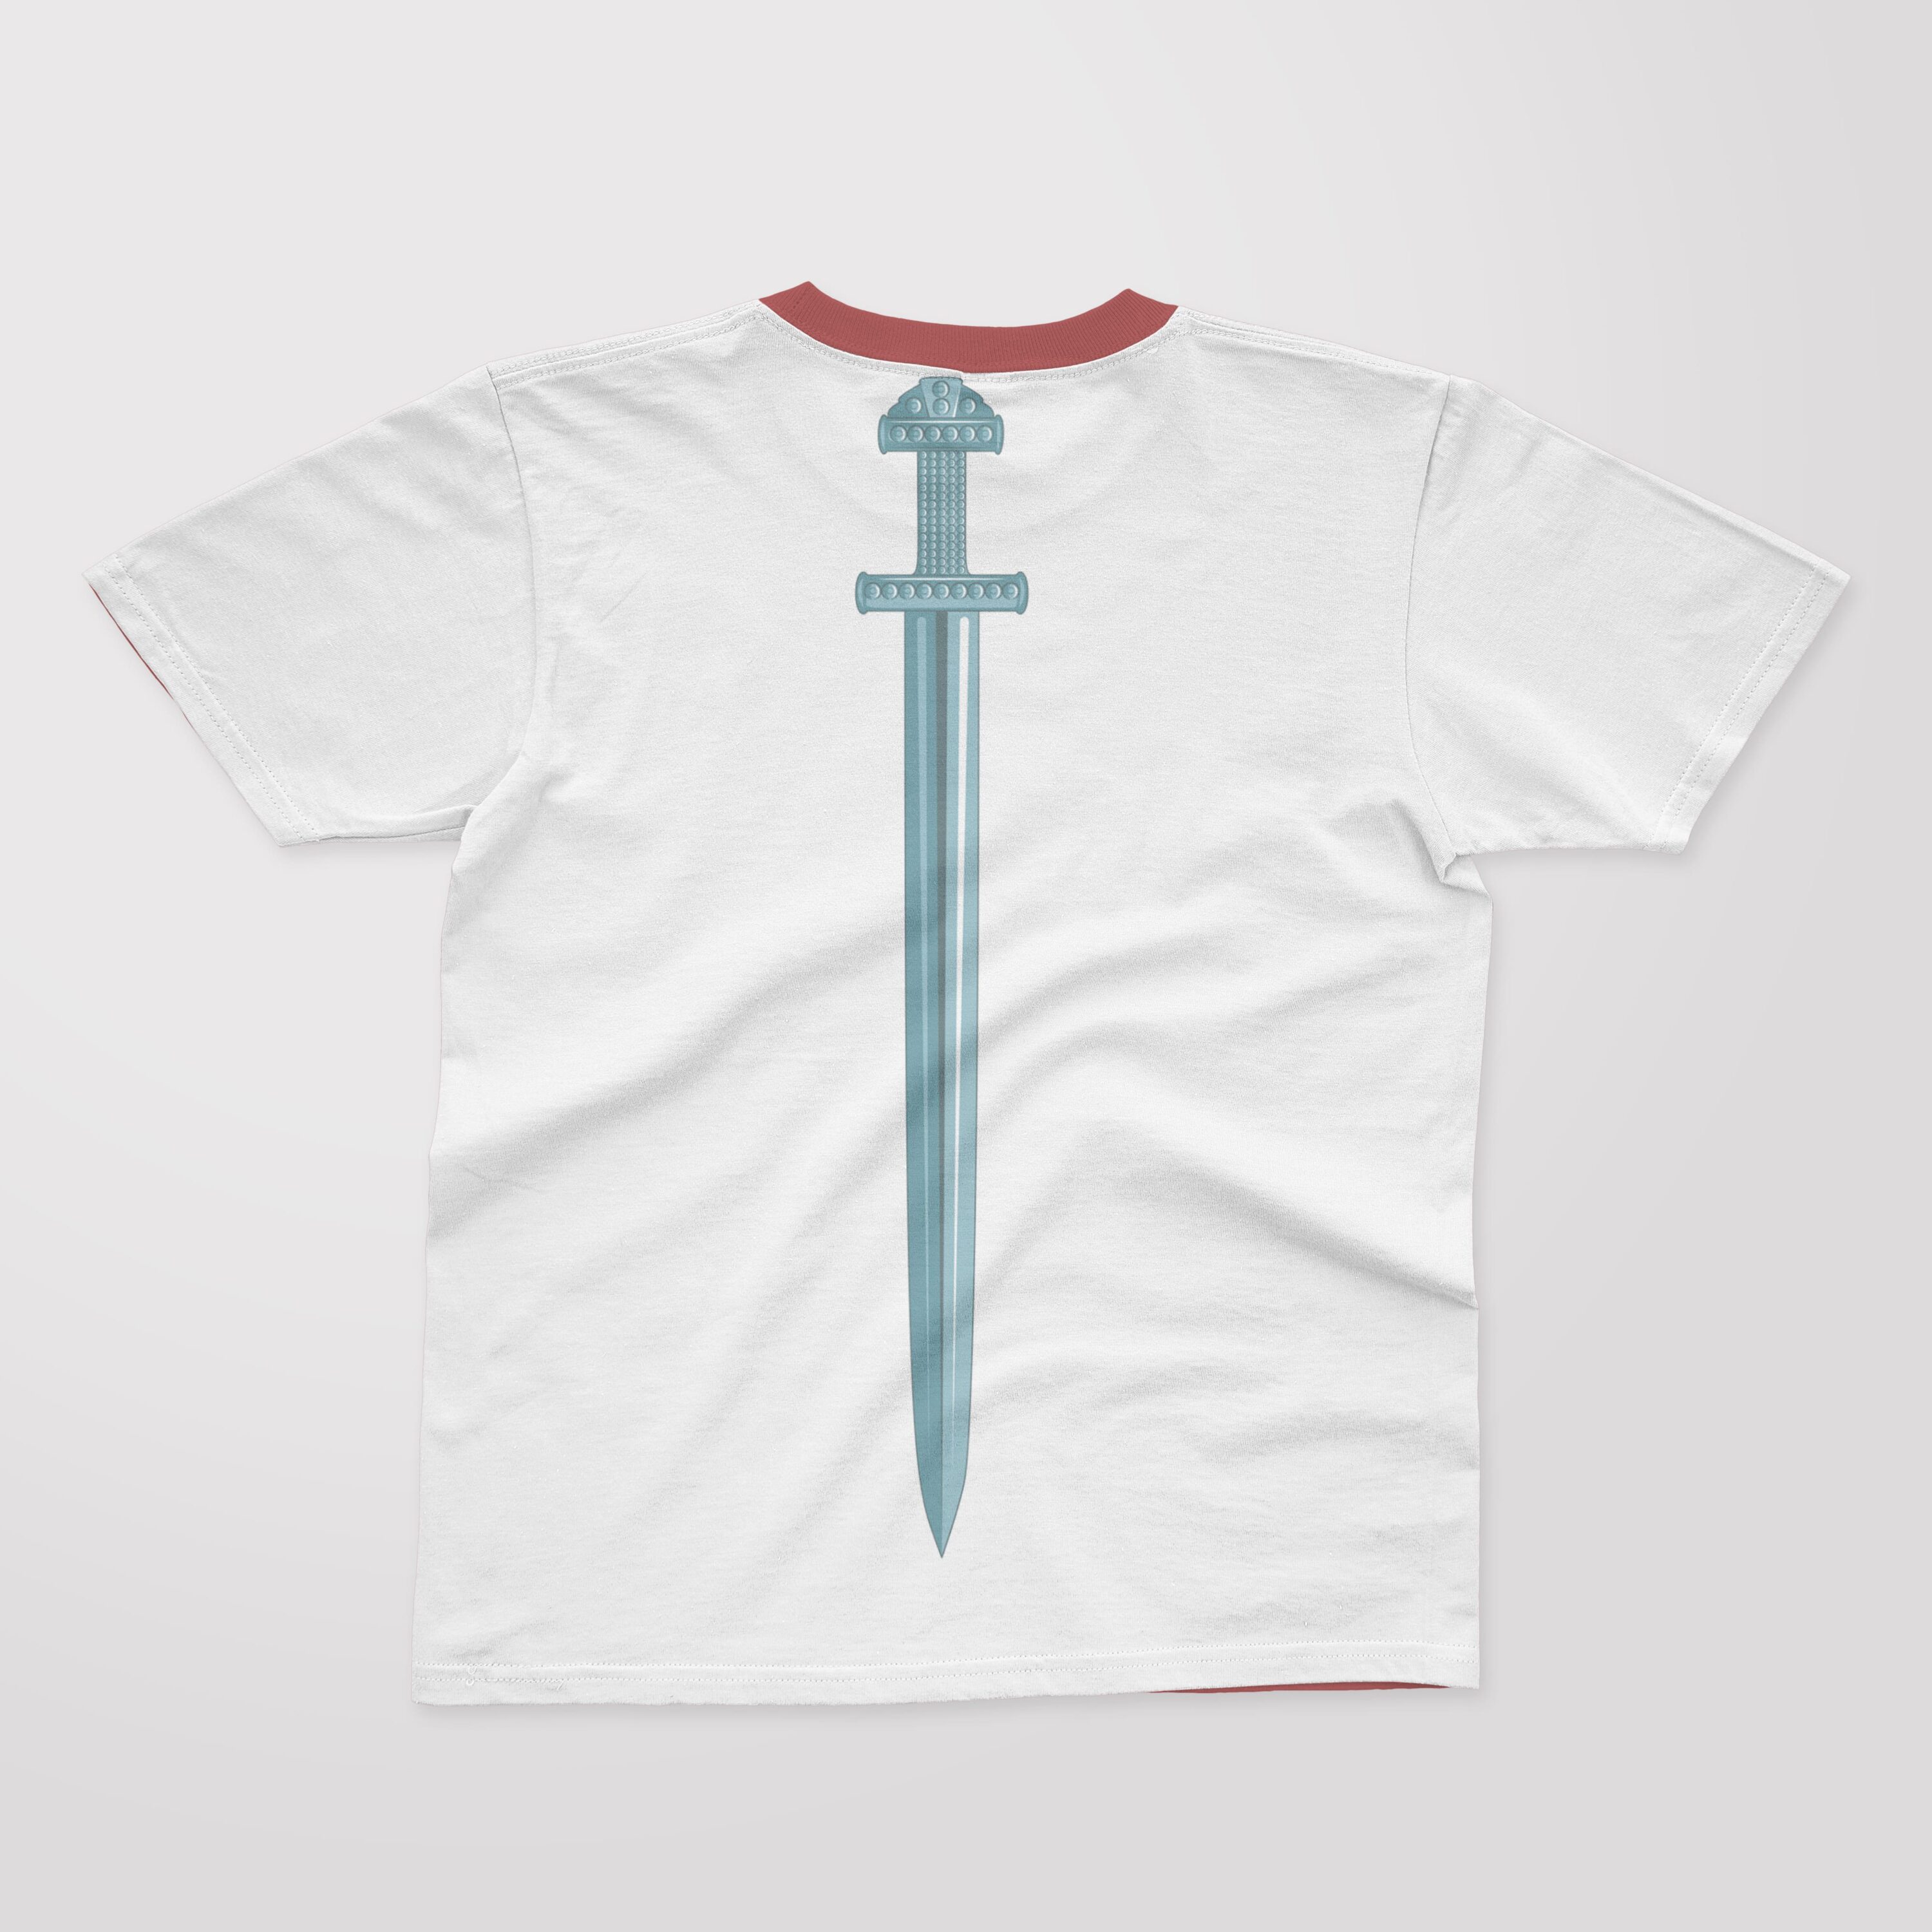 Silver viking sword for the t-shirt.